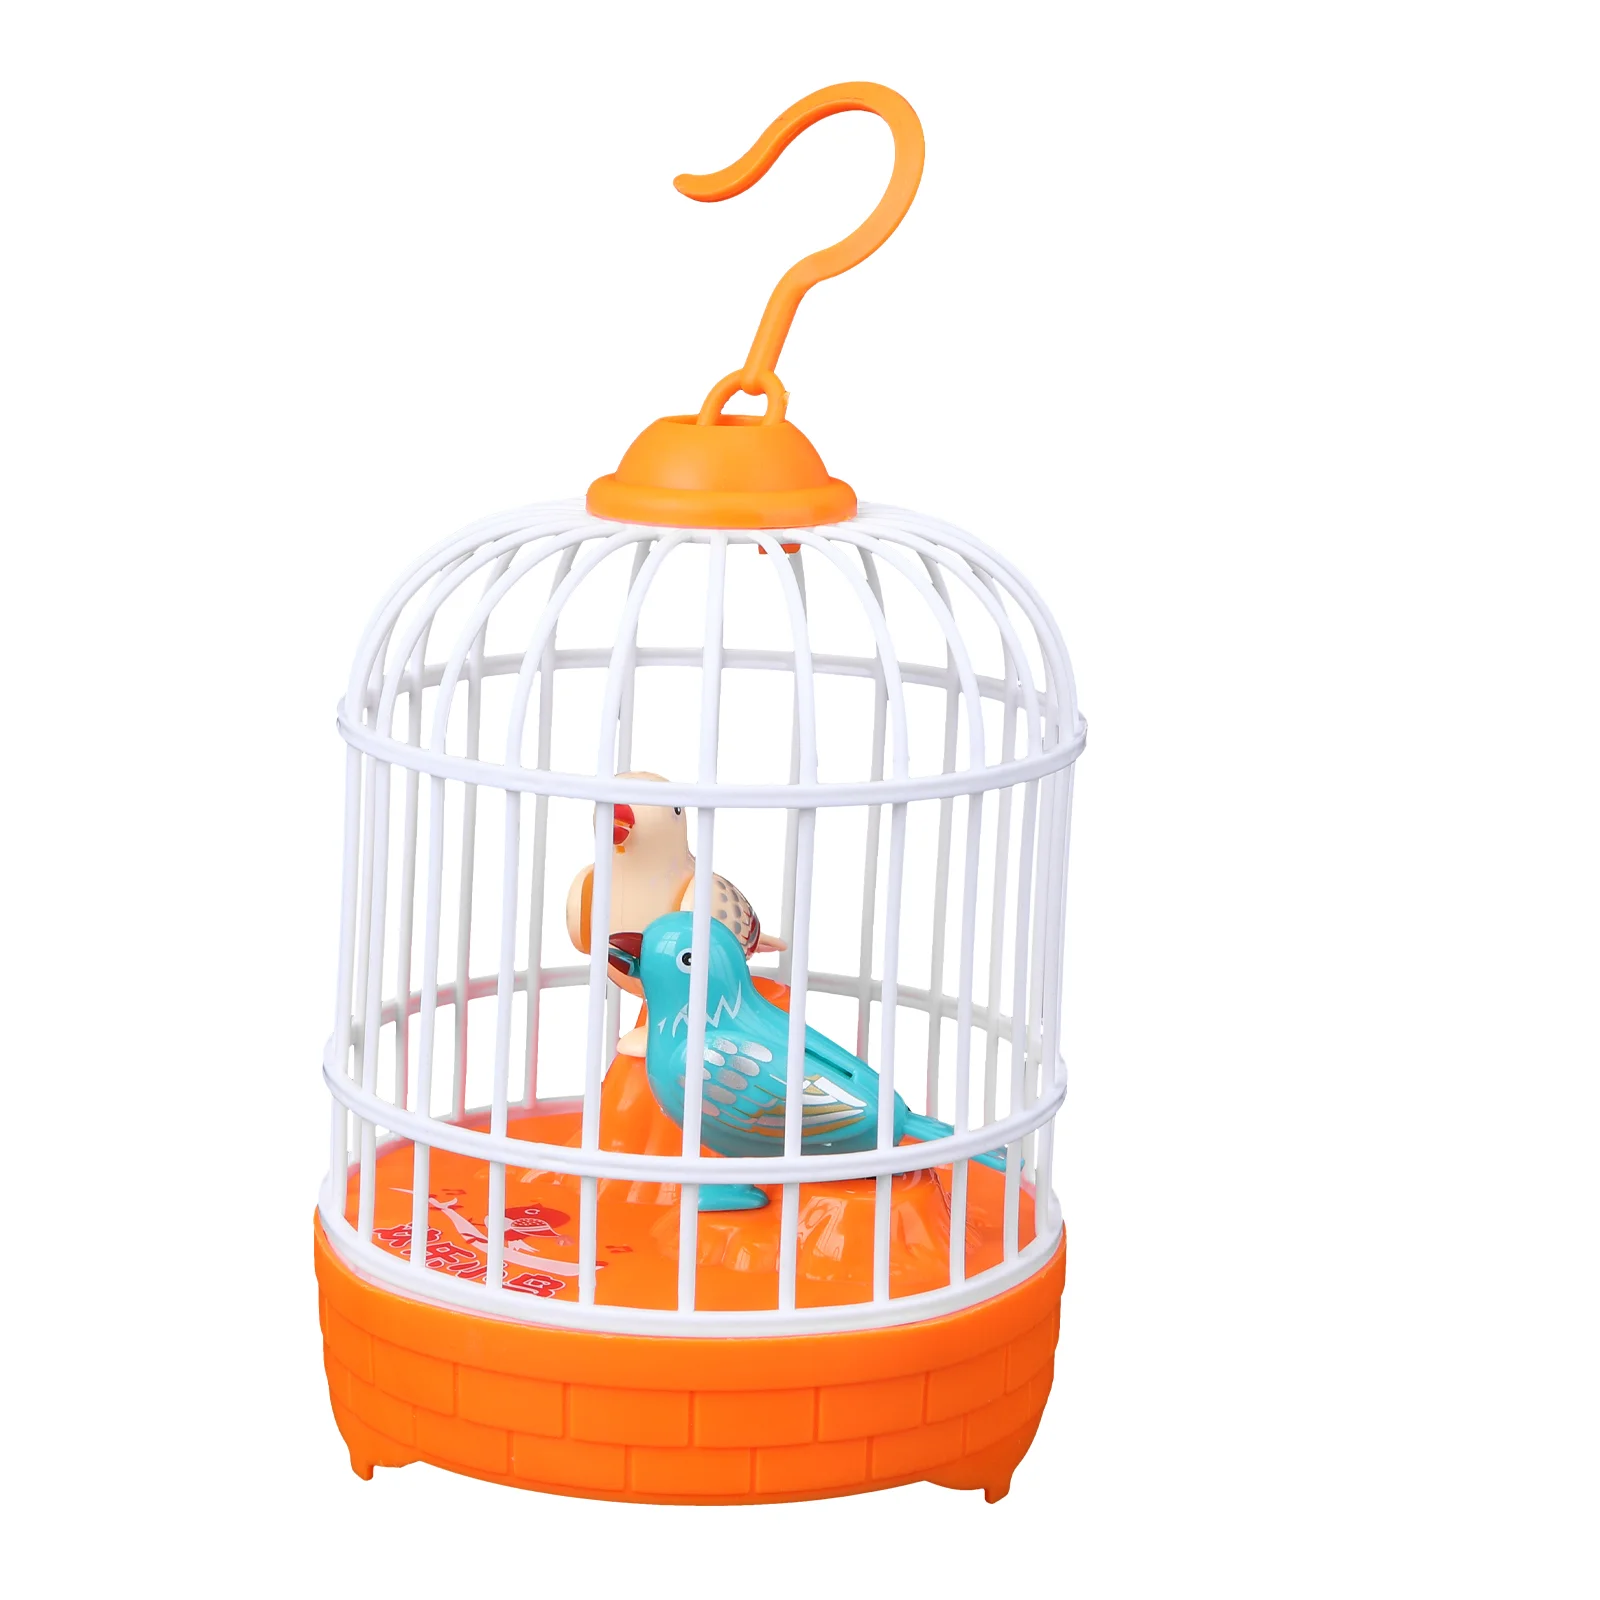 

Educational Toys Simulated Bird Cage Voice-controlled Birds 20x10.5cm Simulation Induction Children Orange Plastic Toddler